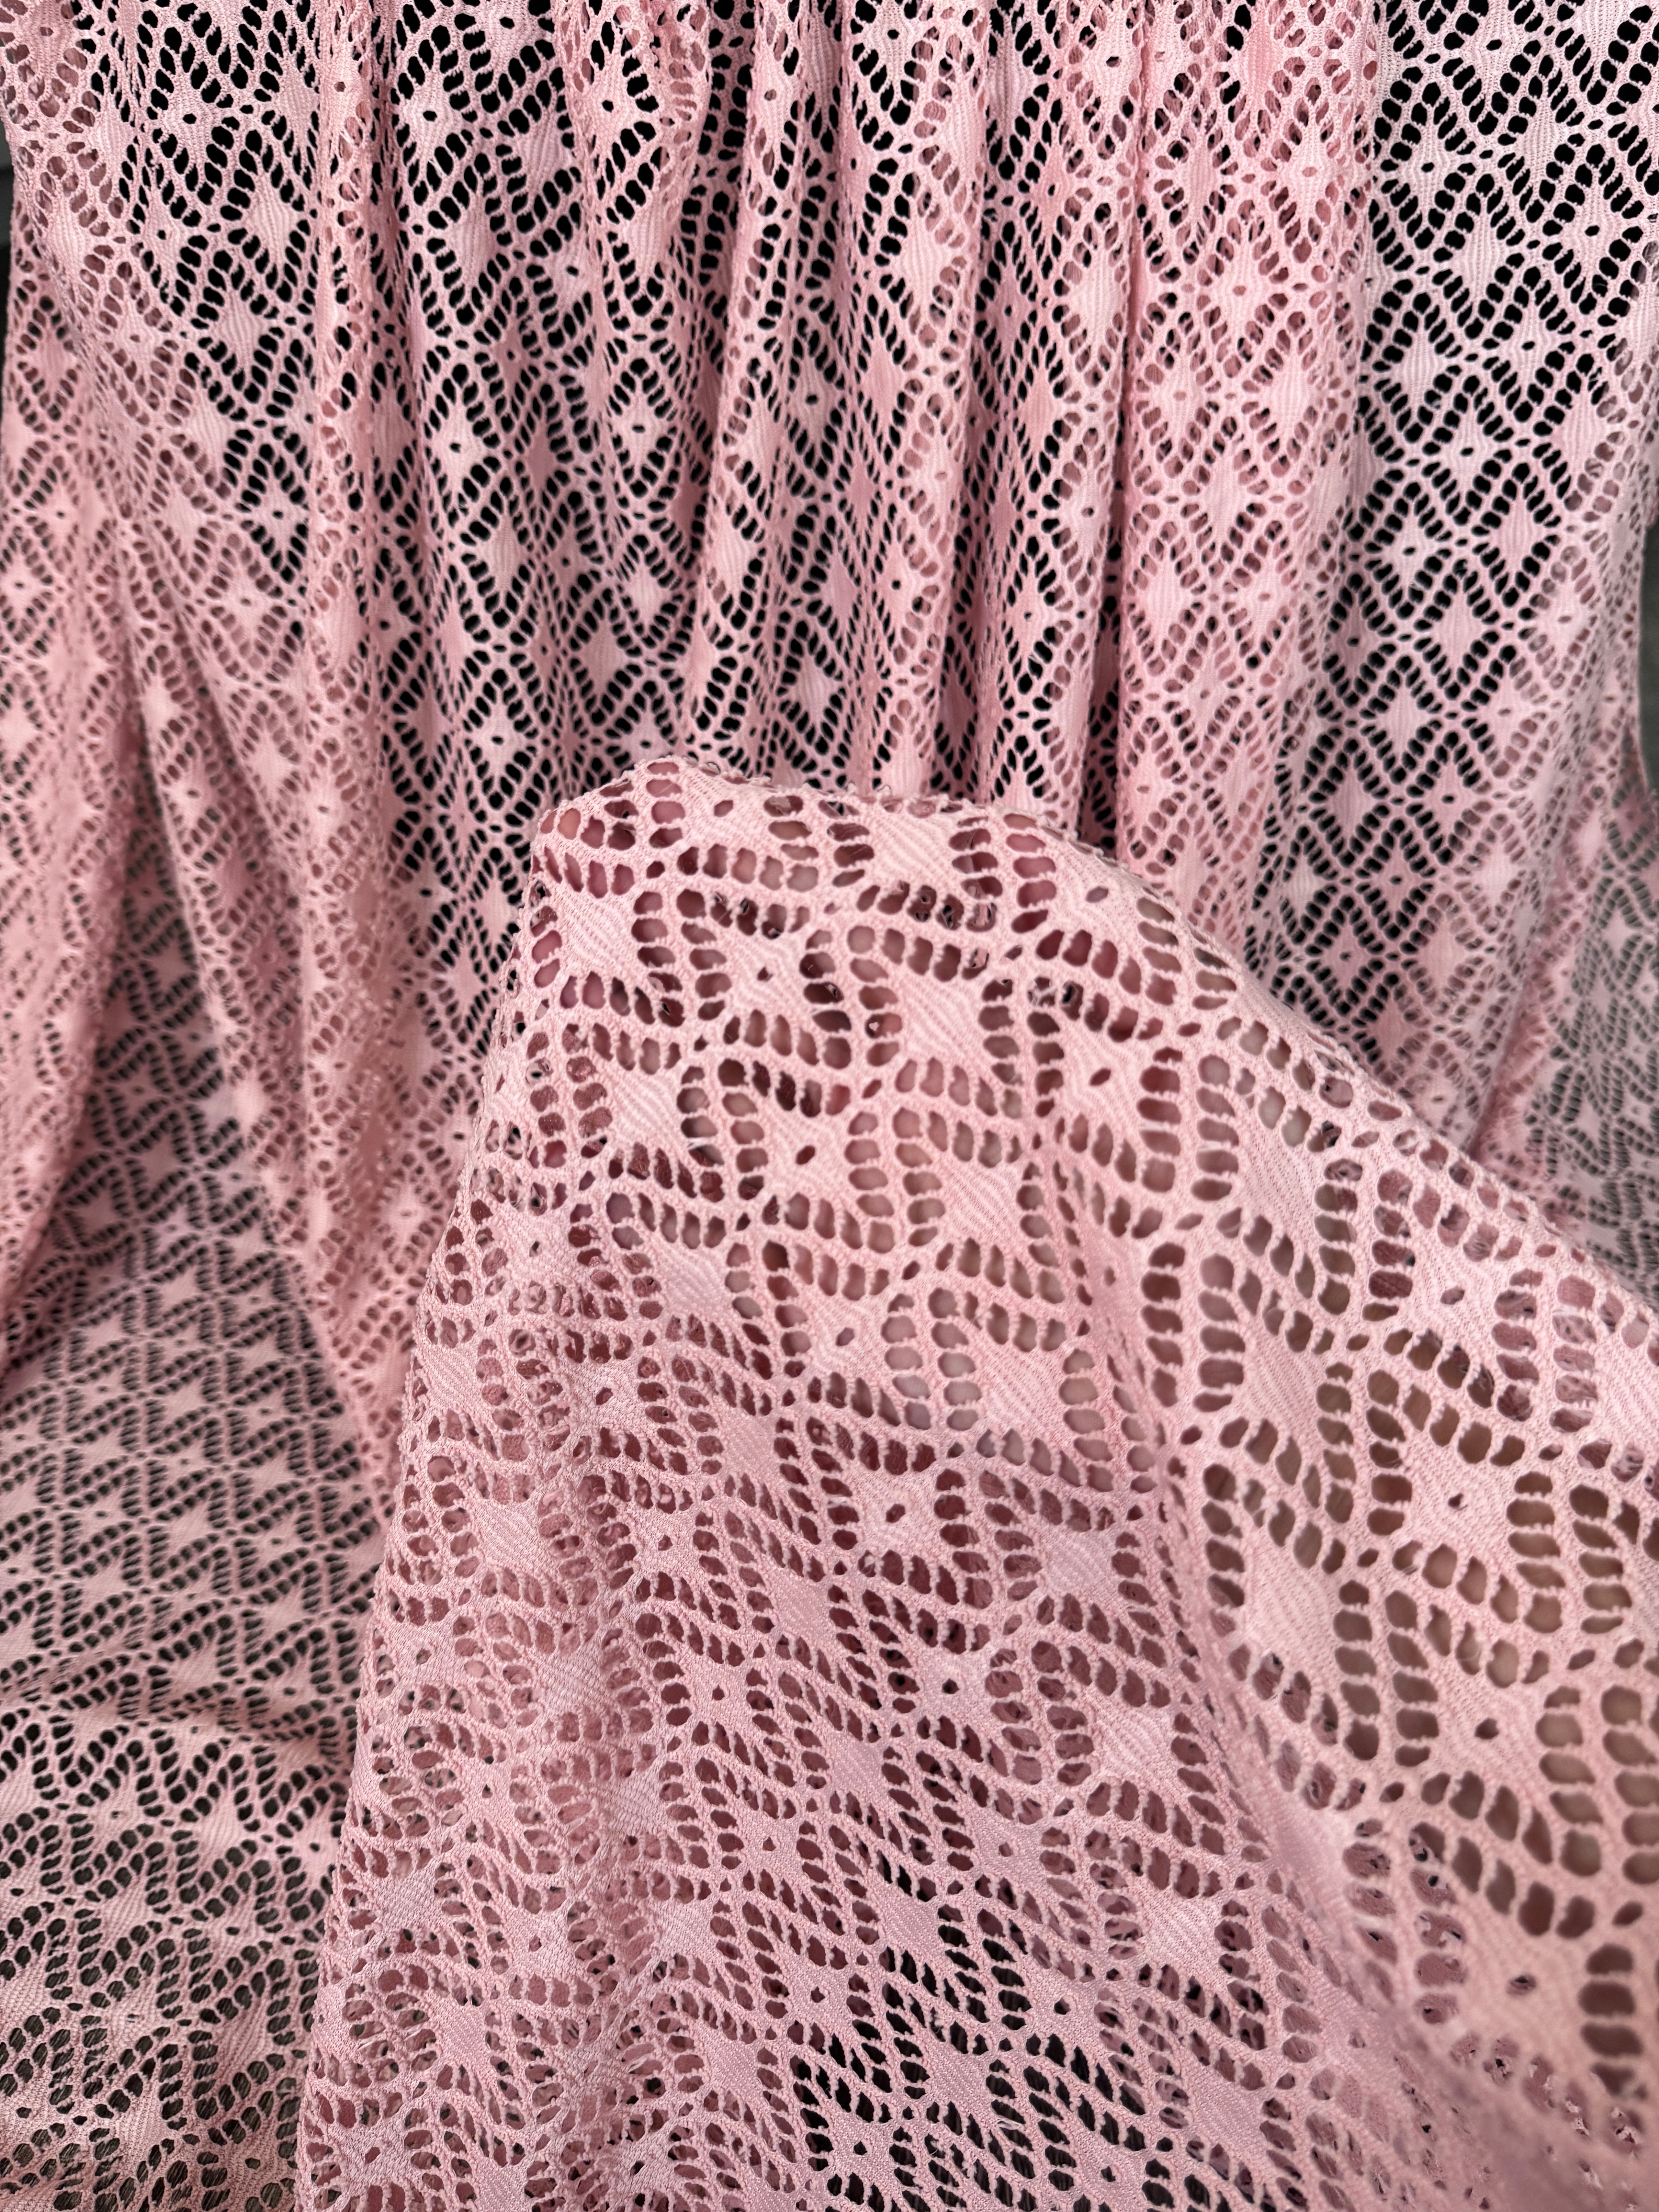 Blush Pink Crochet Hollow Out Knit, Pink Crochet Hollow Out Knit, dark pink Crochet Hollow Out Knit, light pink Crochet Hollow Out Knit, fuchsia Crochet Hollow Out Knit, Crochet Hollow Out Knit on discount, Crochet Hollow Out Knit on sale, Crochet Hollow Out Knit for woman